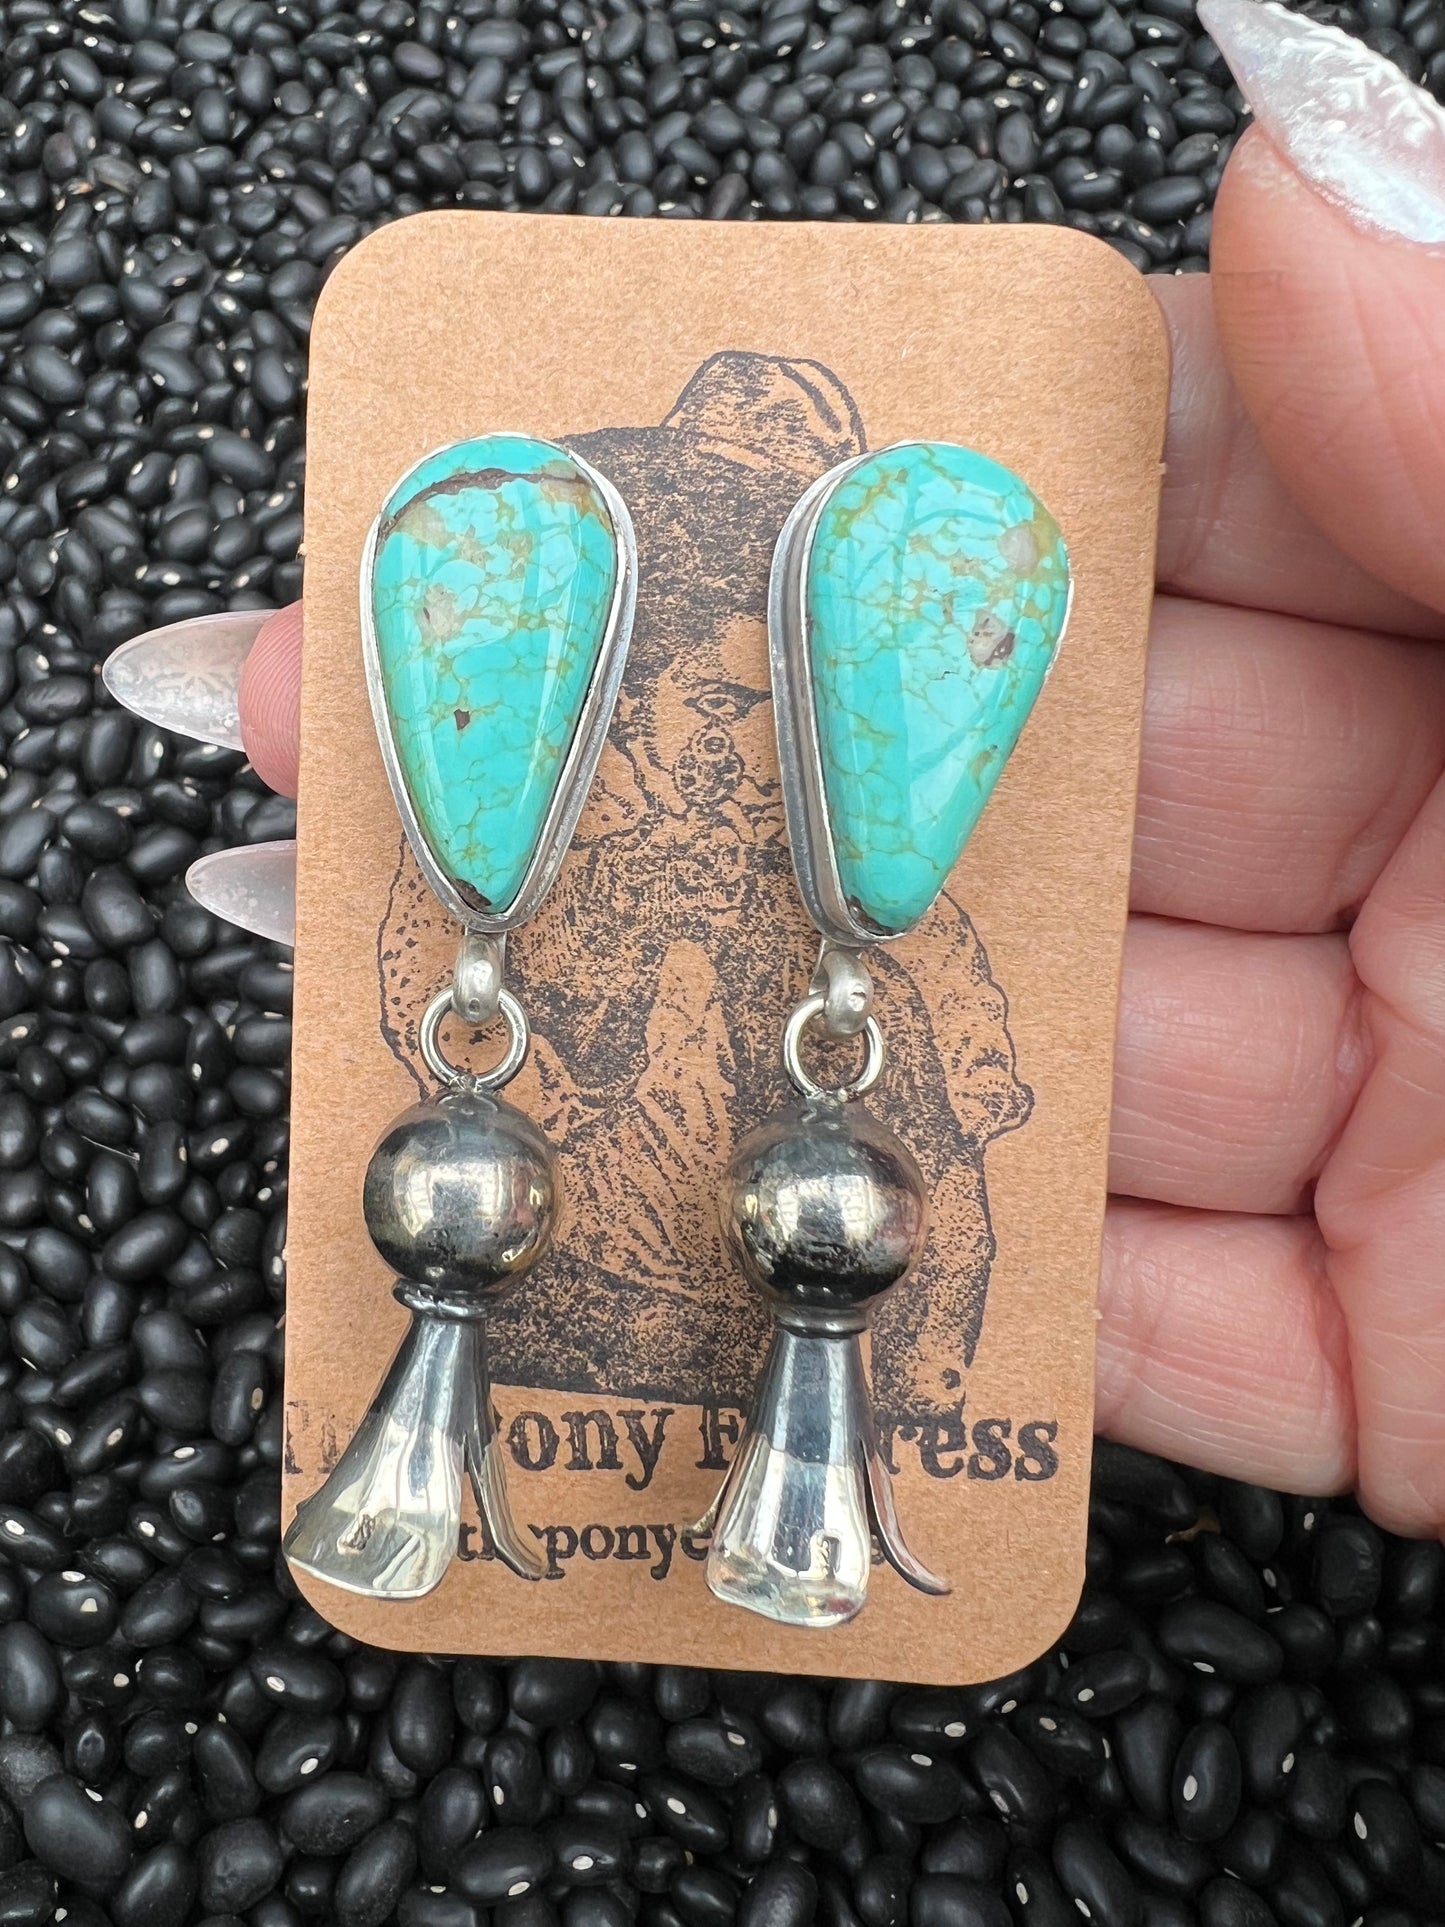 Large Turquoise earrings with squash blossom pendant dangles